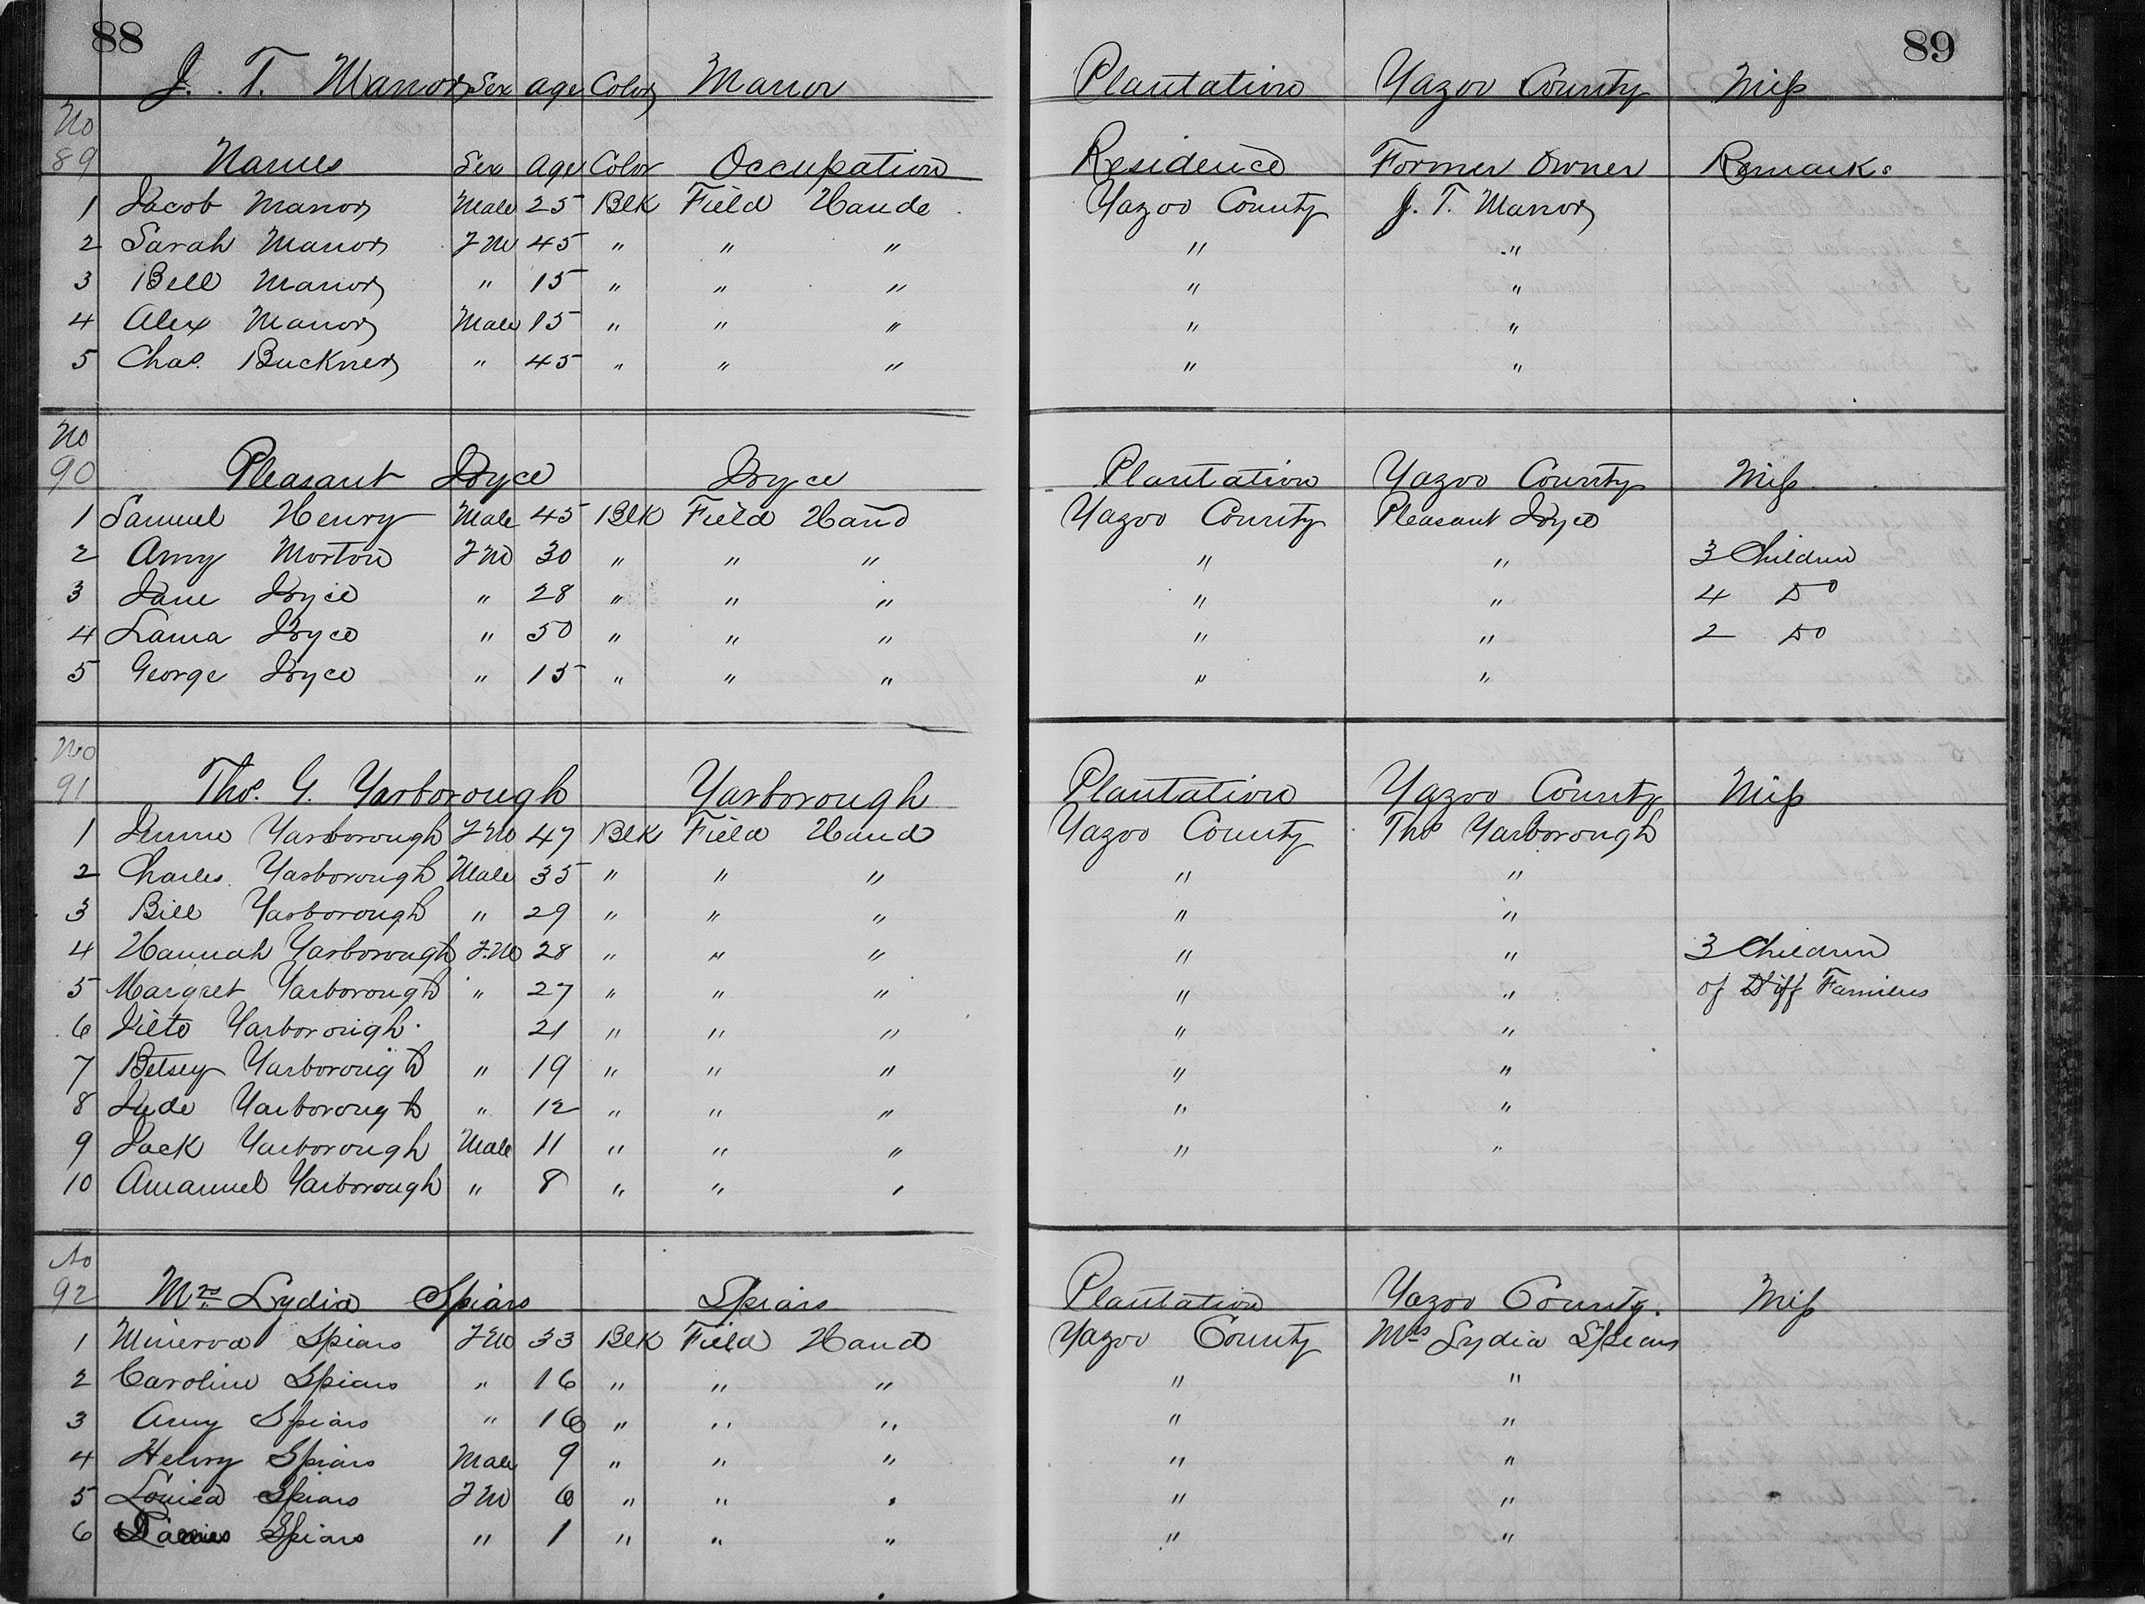 A two page spread of the plantation census. Each person's name, sex, age, plantation, and owner.